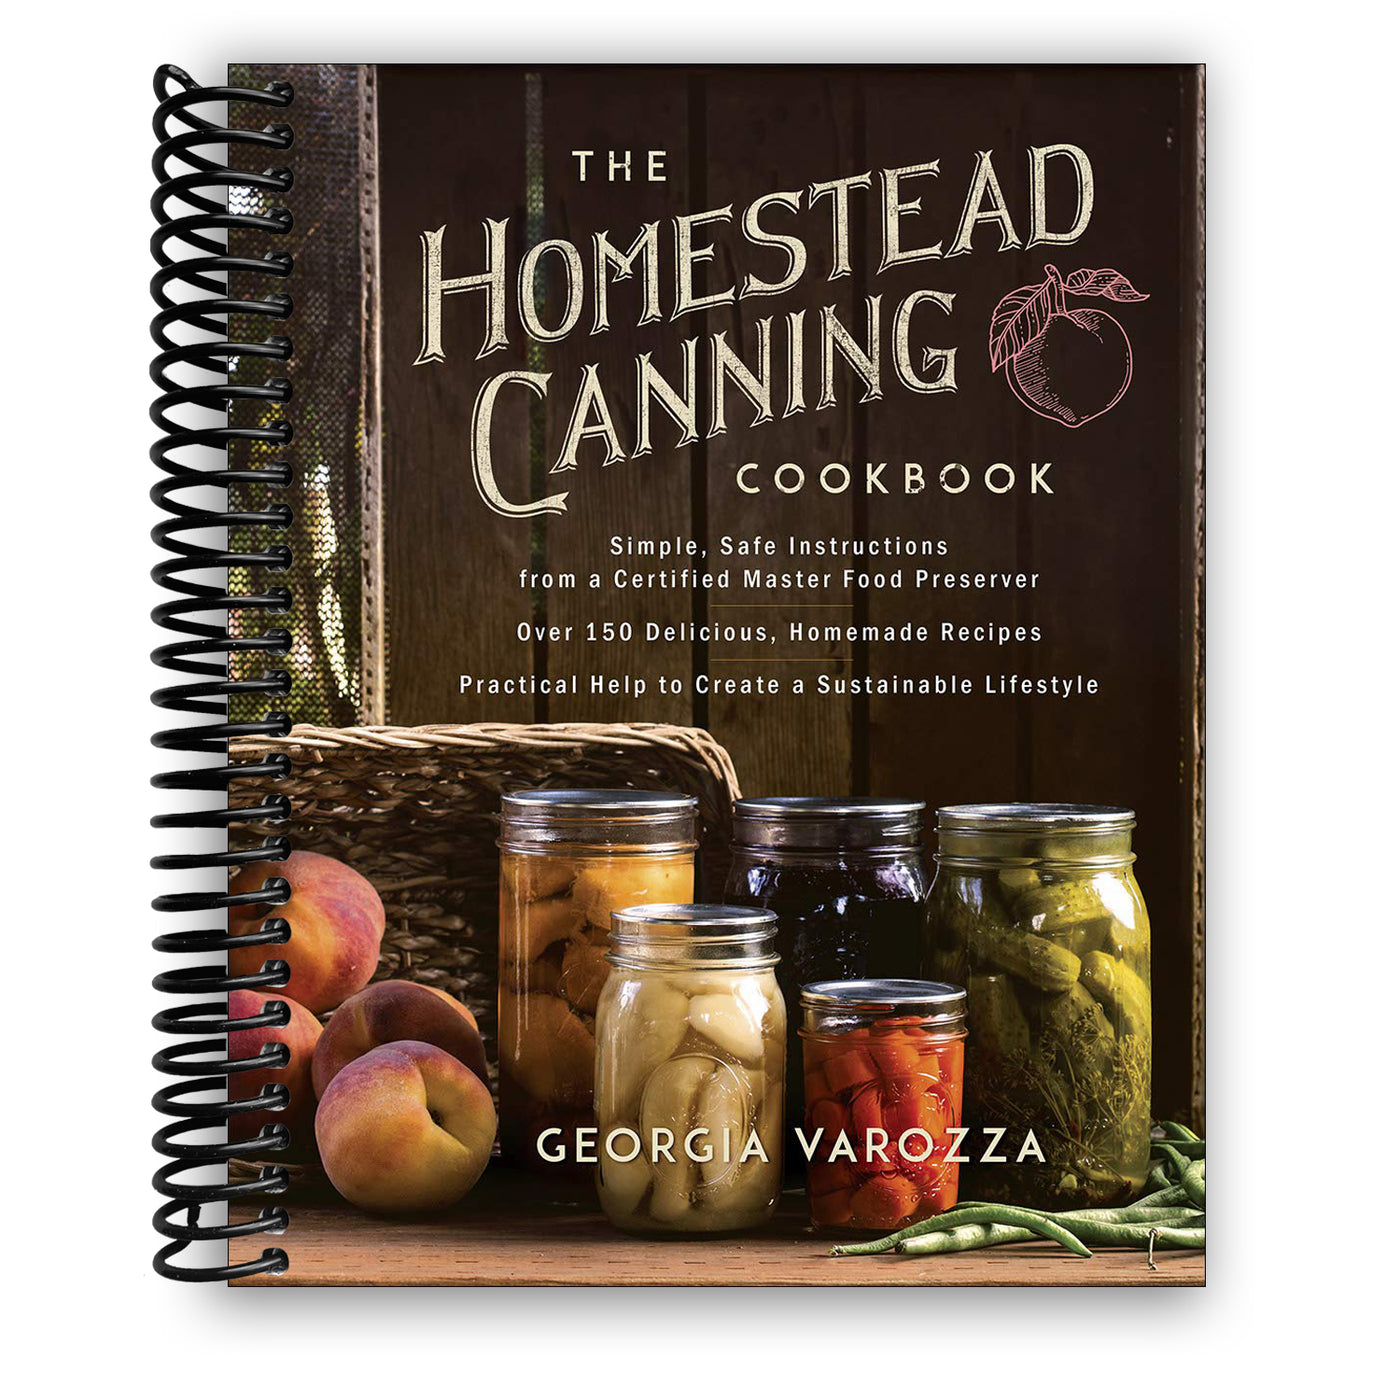 The Homestead Canning Cookbook: ‚Ä¢Simple, Safe Instructions from a Certified Master Food Preserver